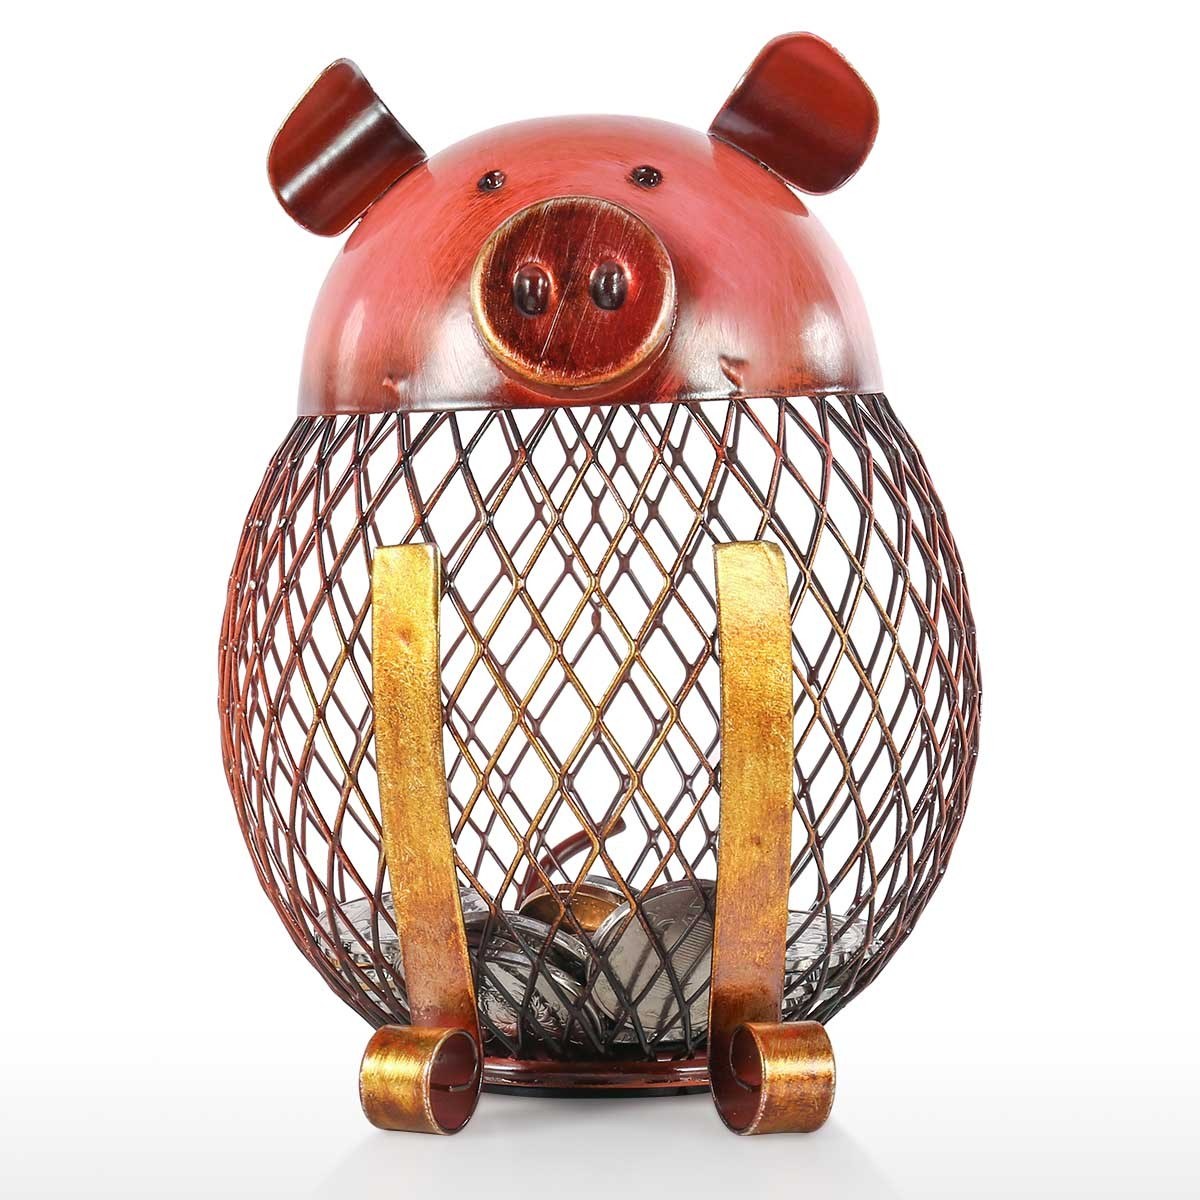 Piggy Bank with Metal Handmade Process Gold and Red Color for Nursery Decor